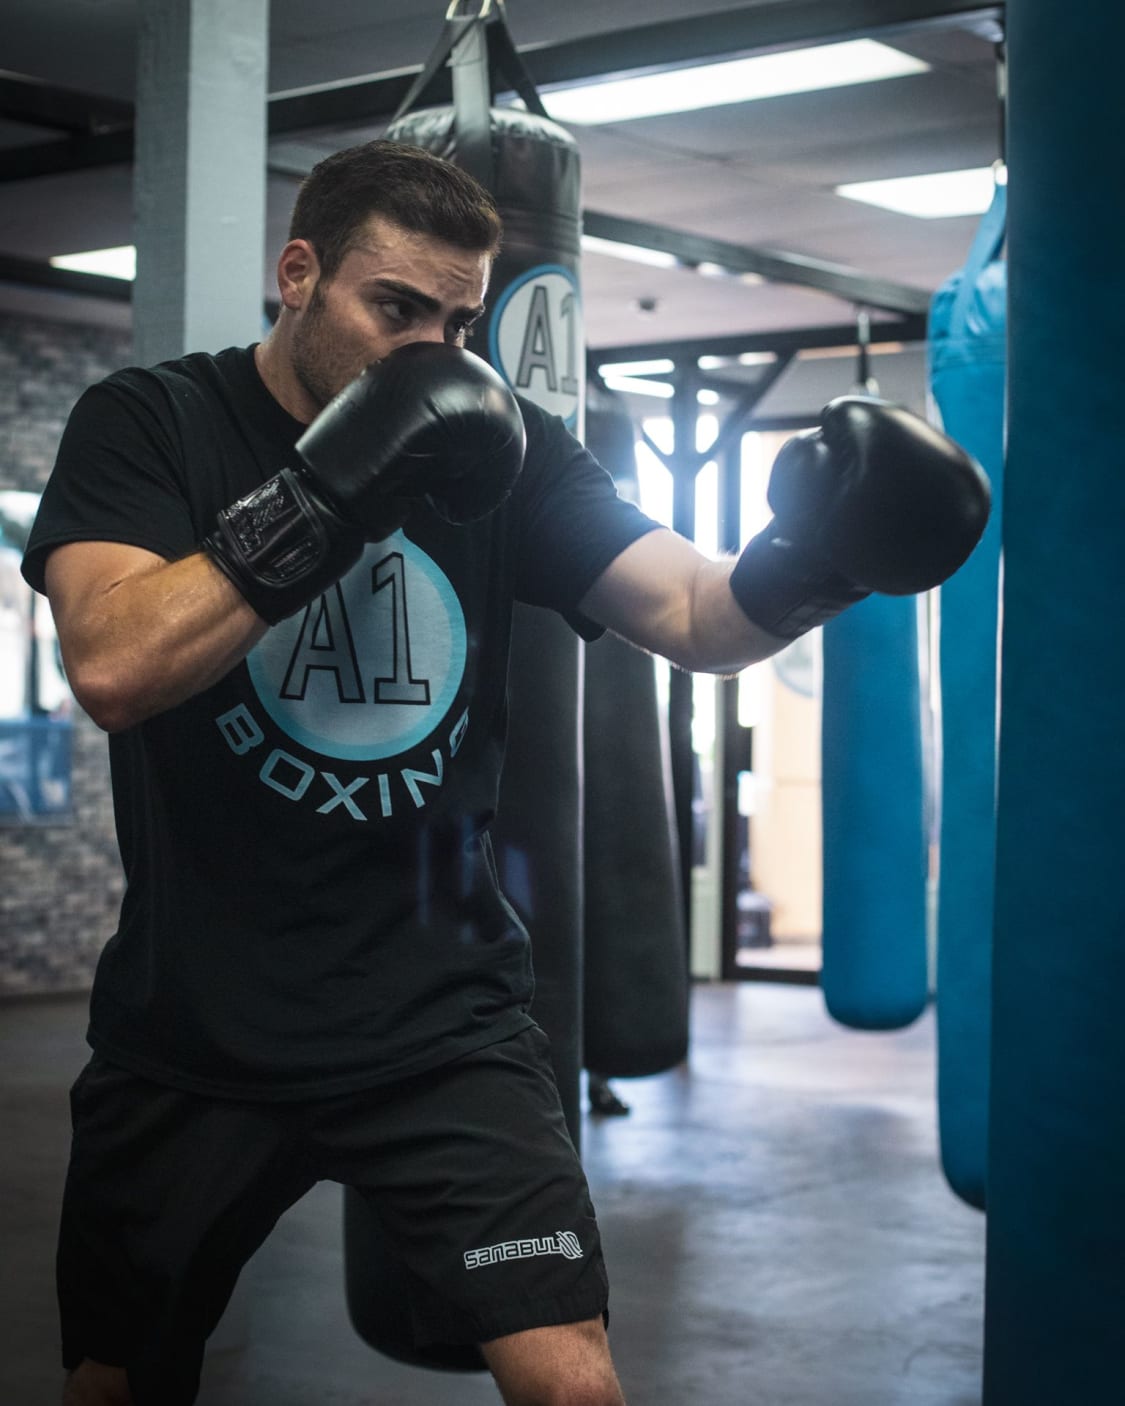 A1 Boxing & Fitness - Aurora: Read Reviews and Book Classes on ClassPass